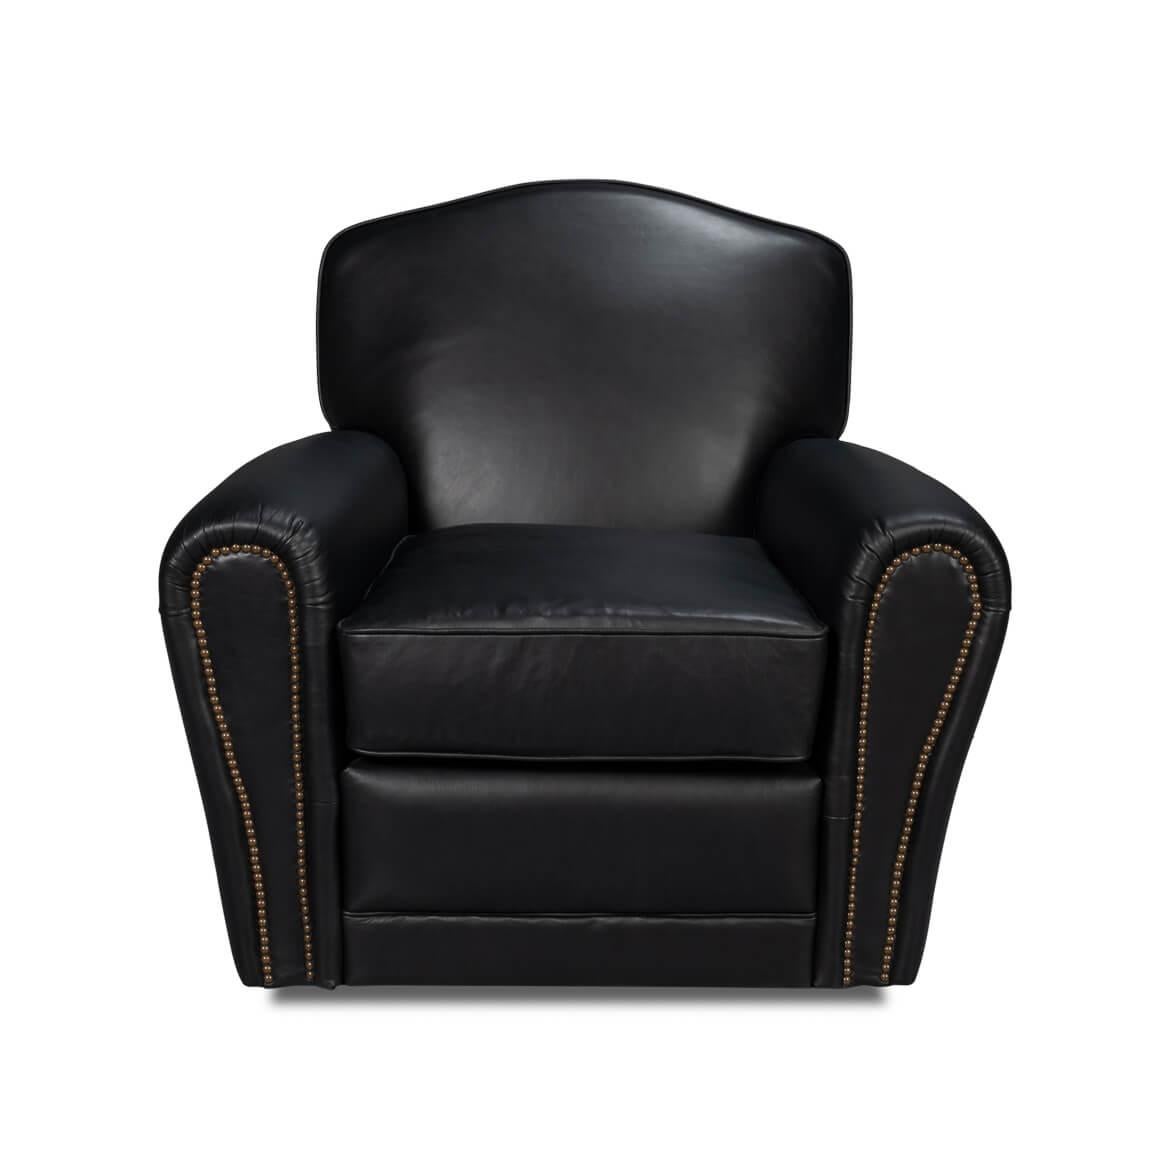 An Art Deco style leather upholstered club chair, in our Onyx Black leather, with long rolled arms, a padded seat back, and cushions, with detailed nailhead trim and raised on a swivel base.
Dimensions: 36